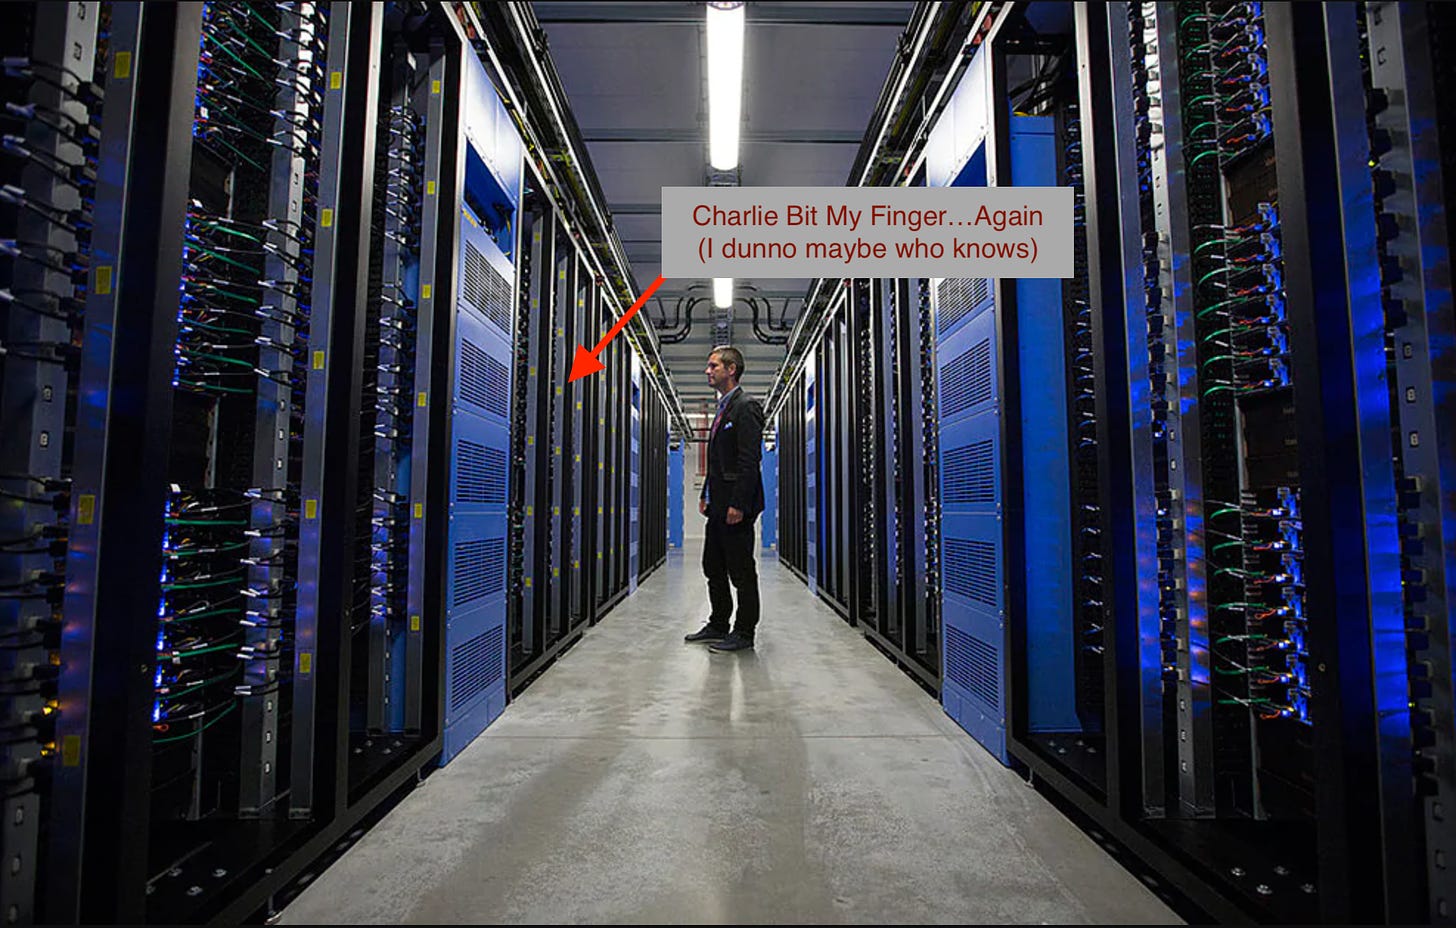 Image from the telegraph inside of a server farm. Caption mentions that maybe the charlie bit my finger video is store here.